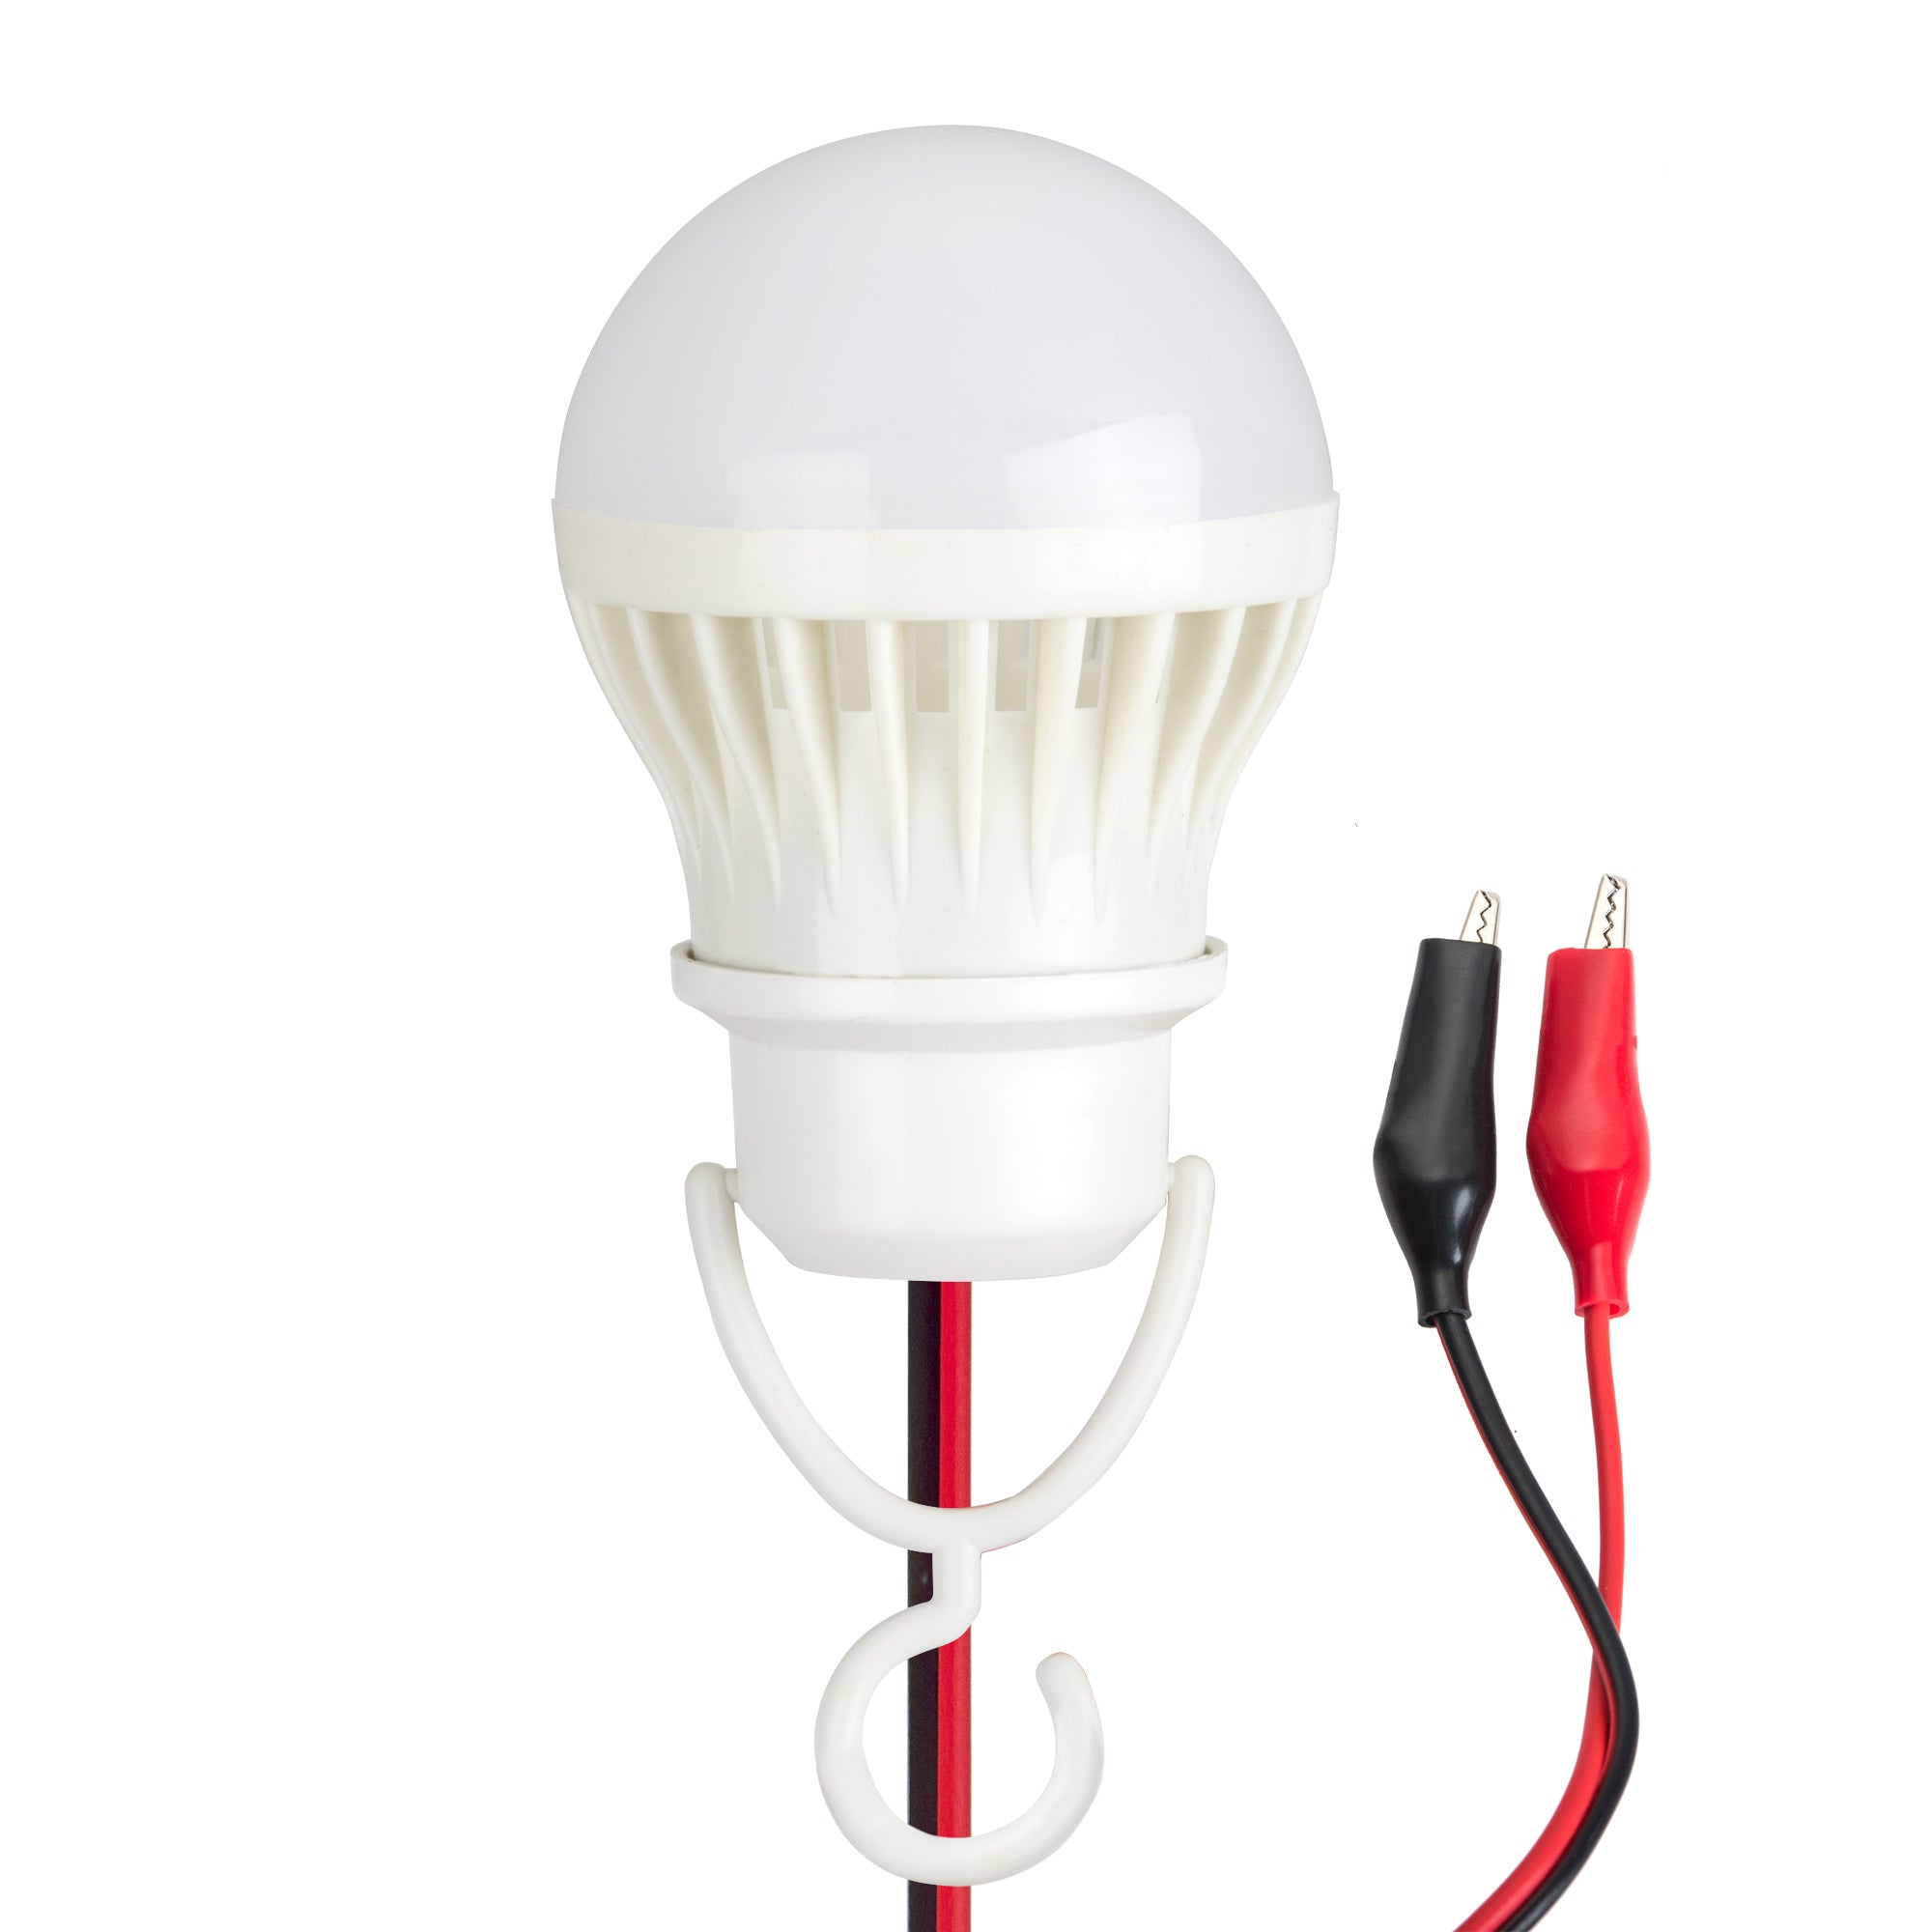 Doordeweekse dagen Bedachtzaam Glimmend 6V Battery Powered 3W Powerful LED Bulb w Wire and Clip - 12VMonster  Lighting